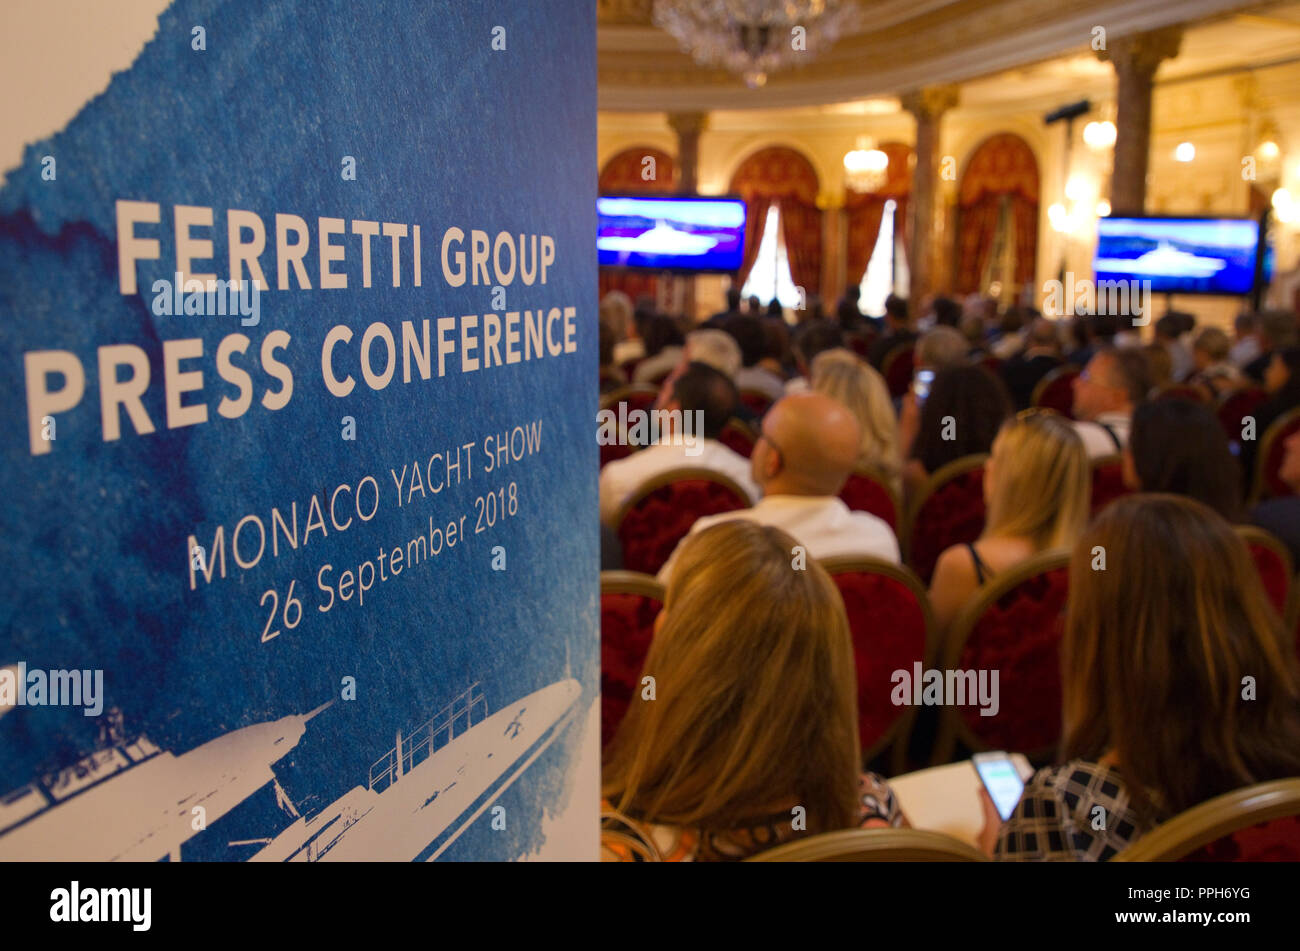 Monte Carlo, Monaco - September 26, 2018: Ferretti Group Press Conference at Monaco Yacht Show at Hotel Hermitage. Yachts, Yachten, Boot, Boote, Ship, Ships, Superyacht | usage worldwide Stock Photo